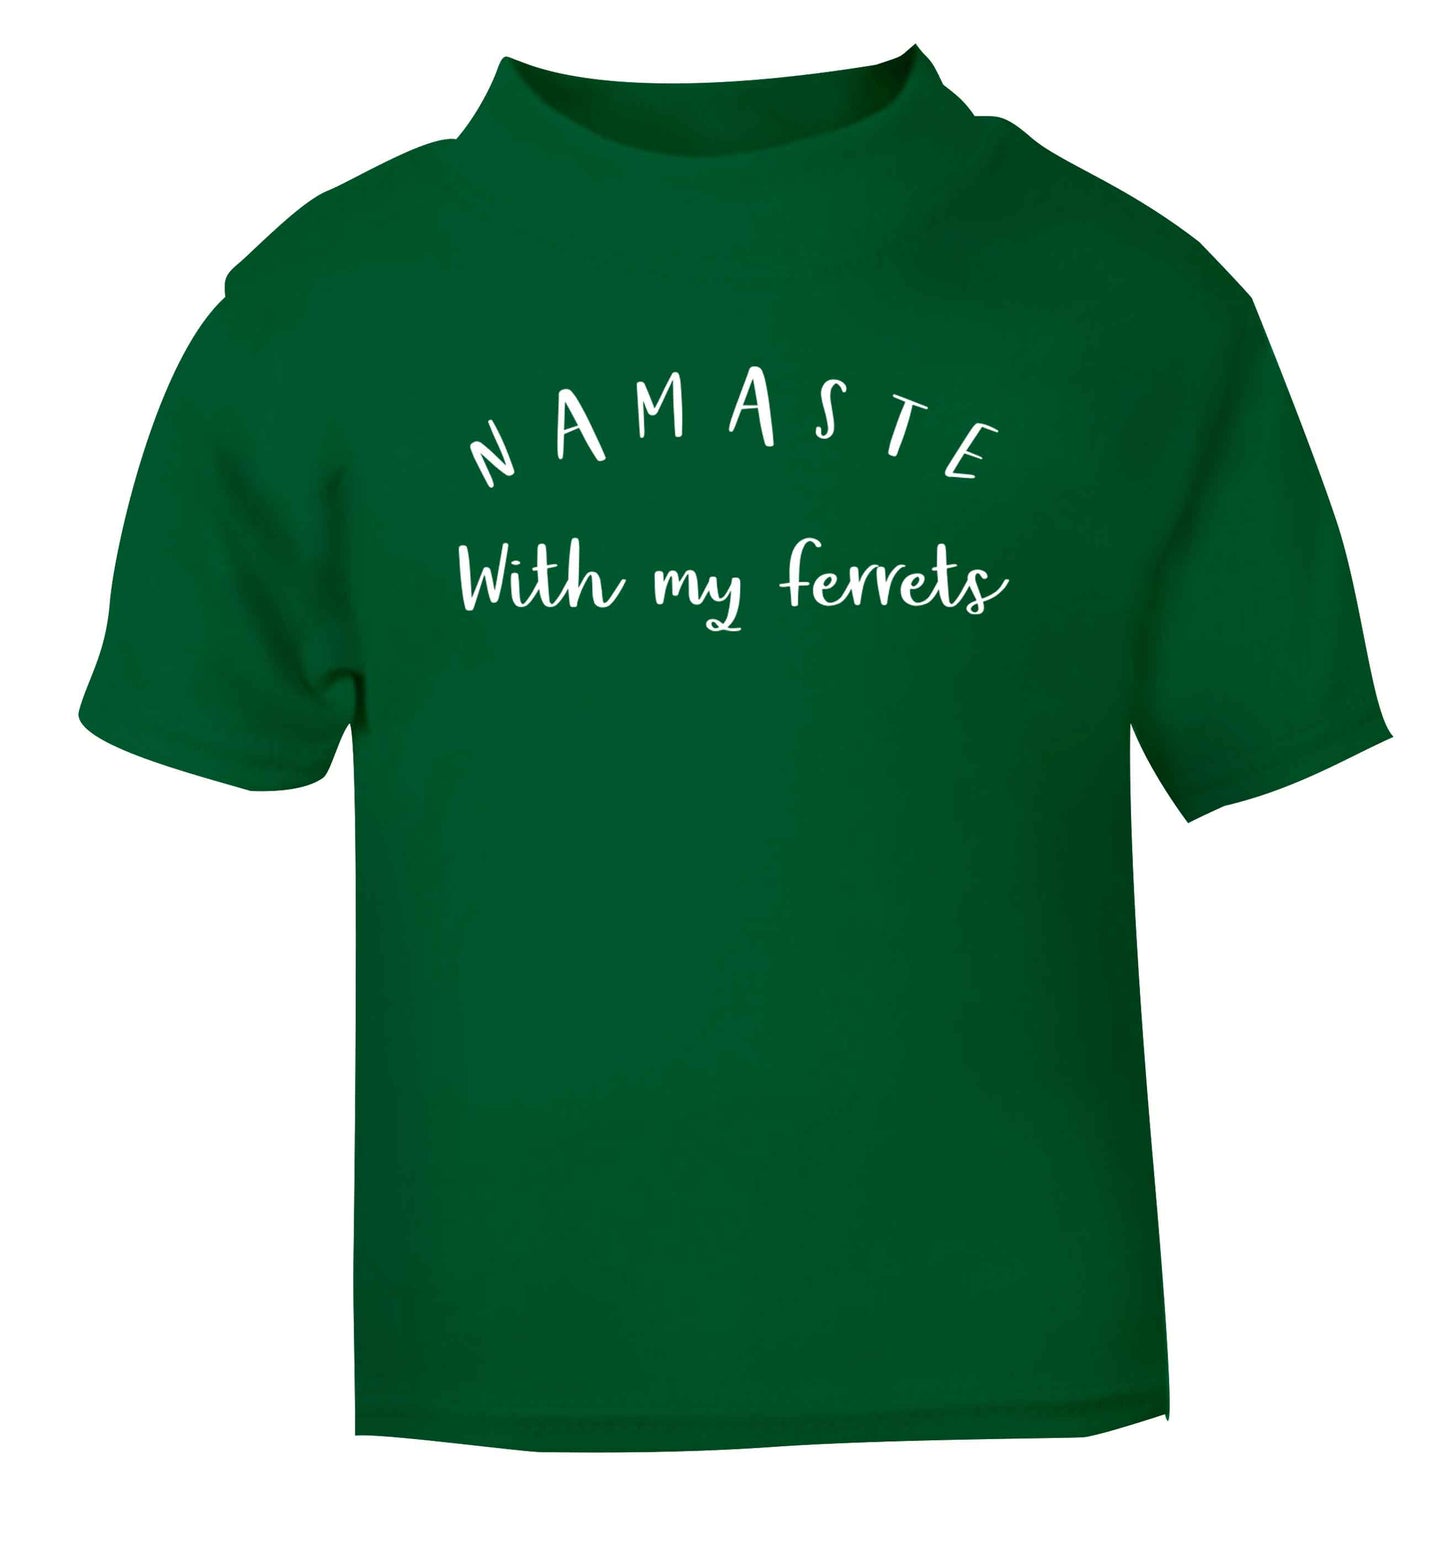 Namaste with my ferrets green Baby Toddler Tshirt 2 Years